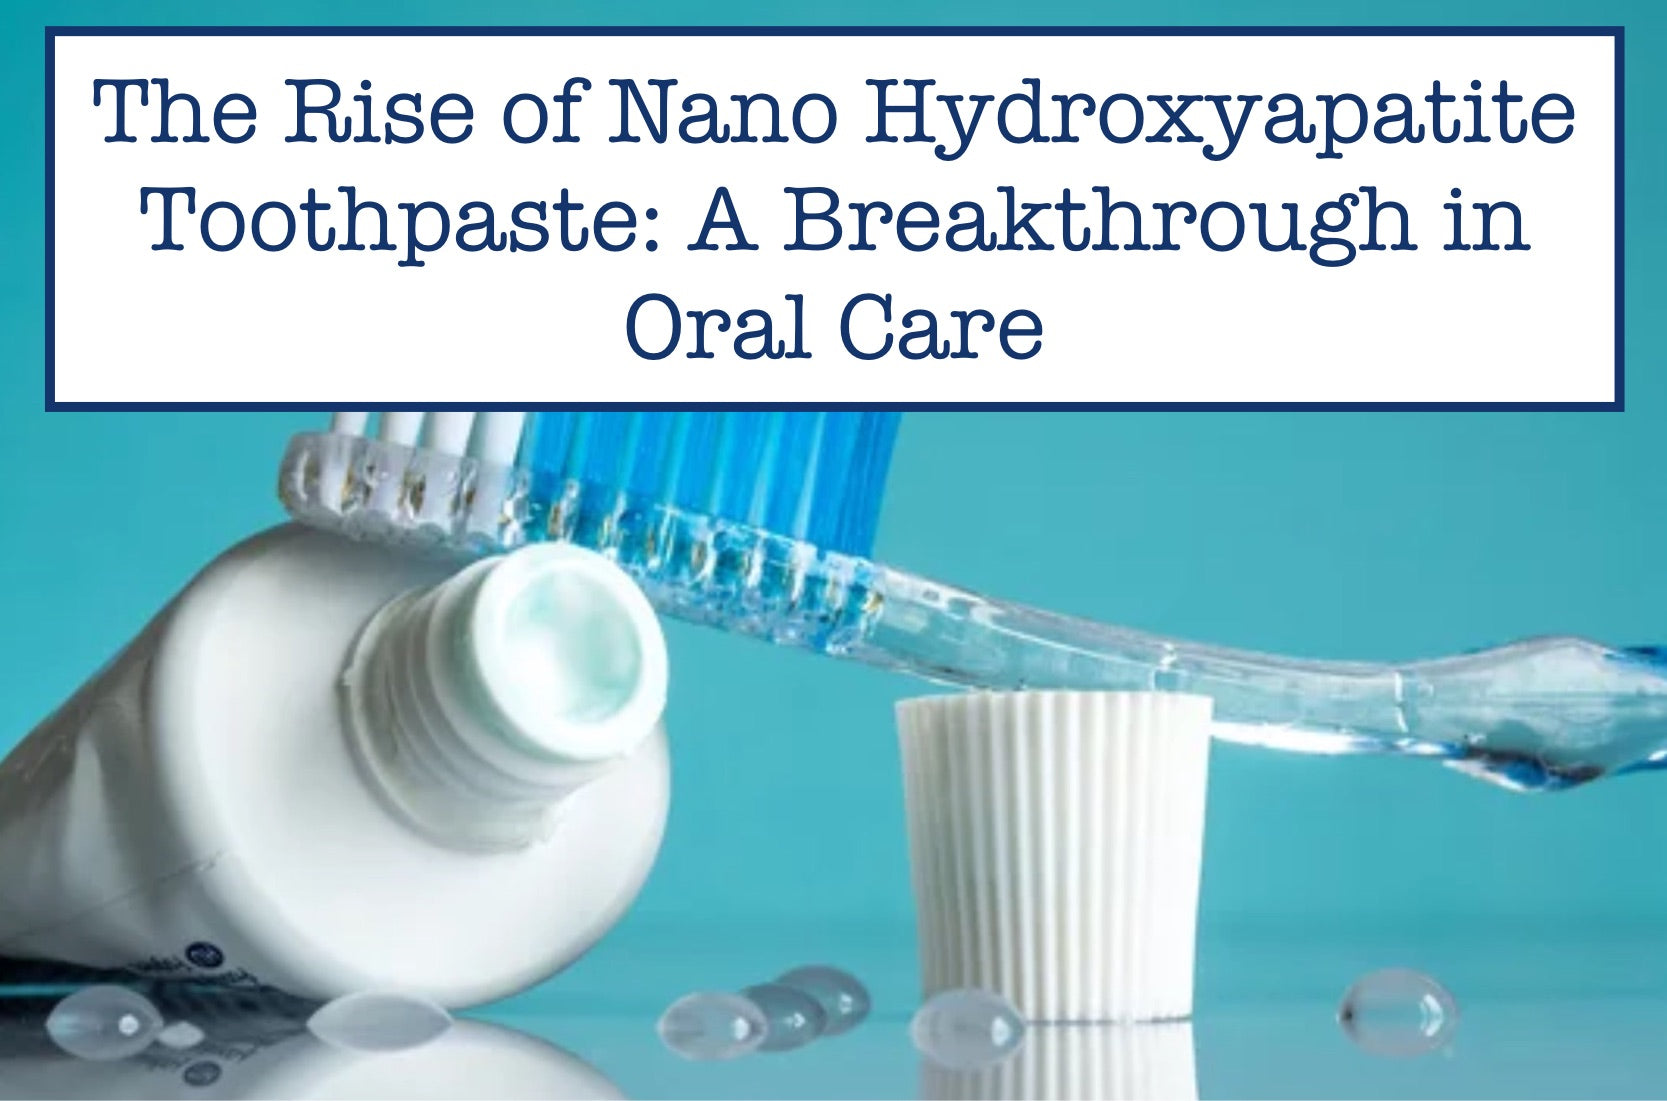 The Rise of Nano Hydroxyapatite Toothpaste: A Breakthrough in Oral Care